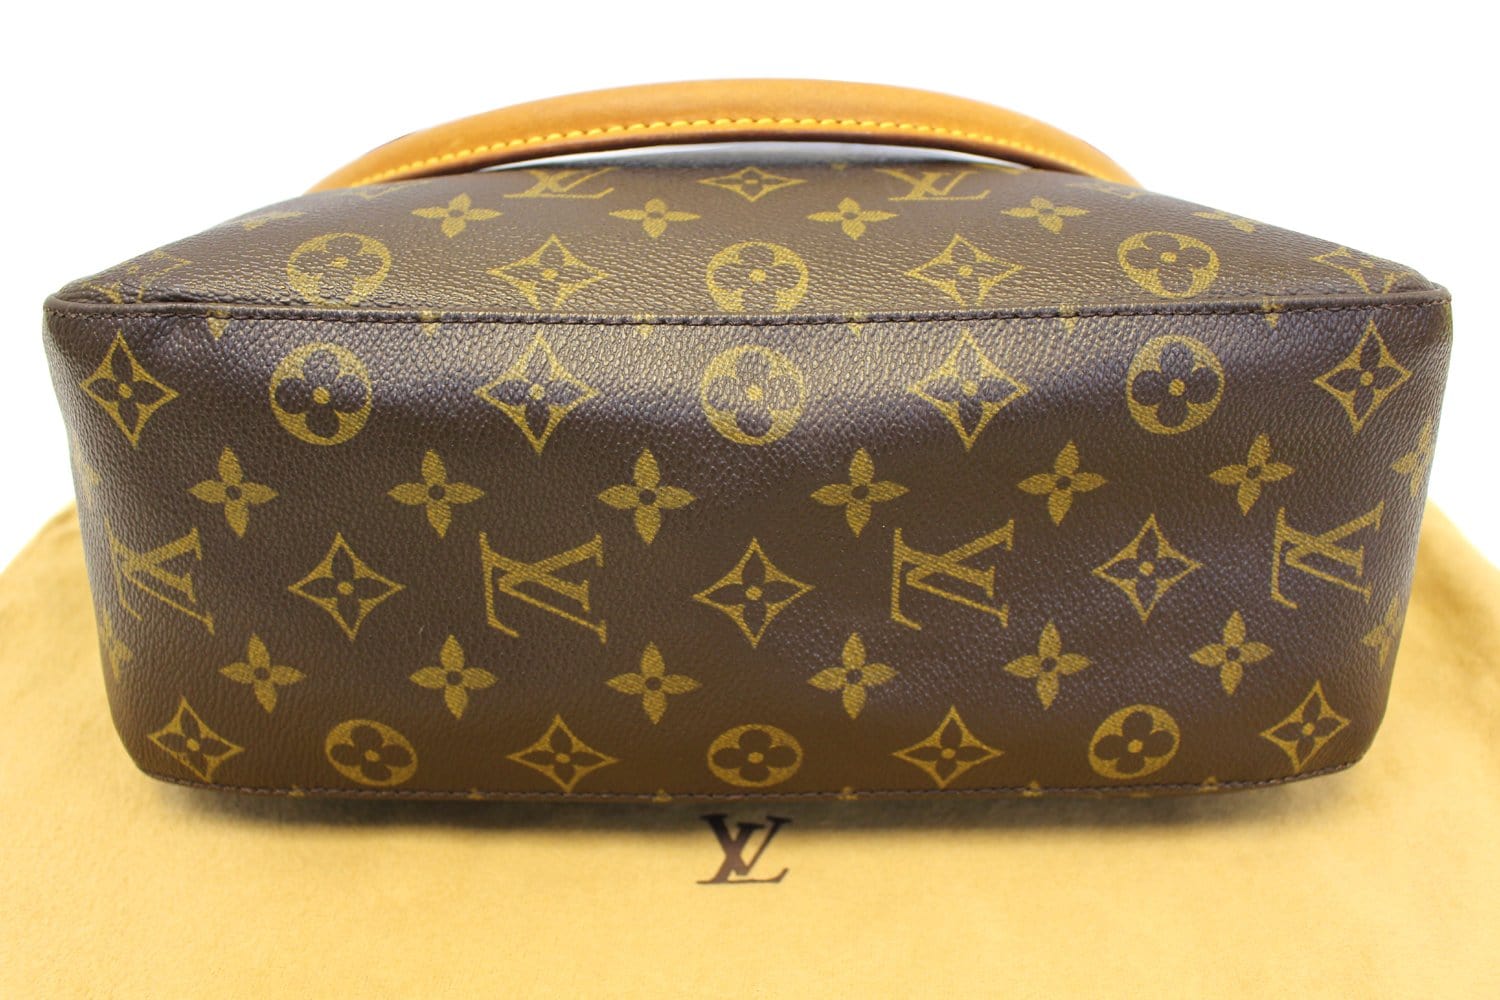 BSBA2A - Lv.docx - 1. The Supply Chain Strategies Of Louis Vuitton